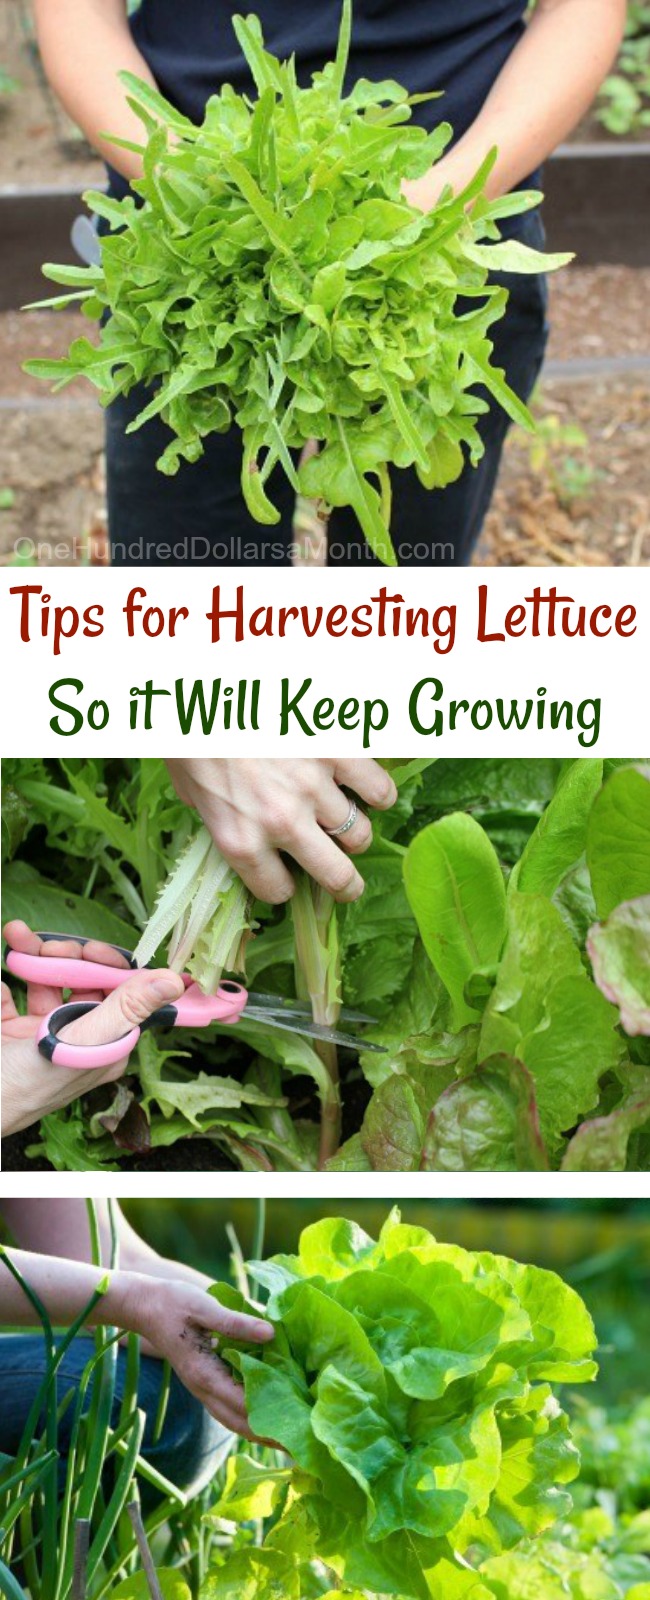 Tips for Harvesting Lettuce So it Will Keep Growing